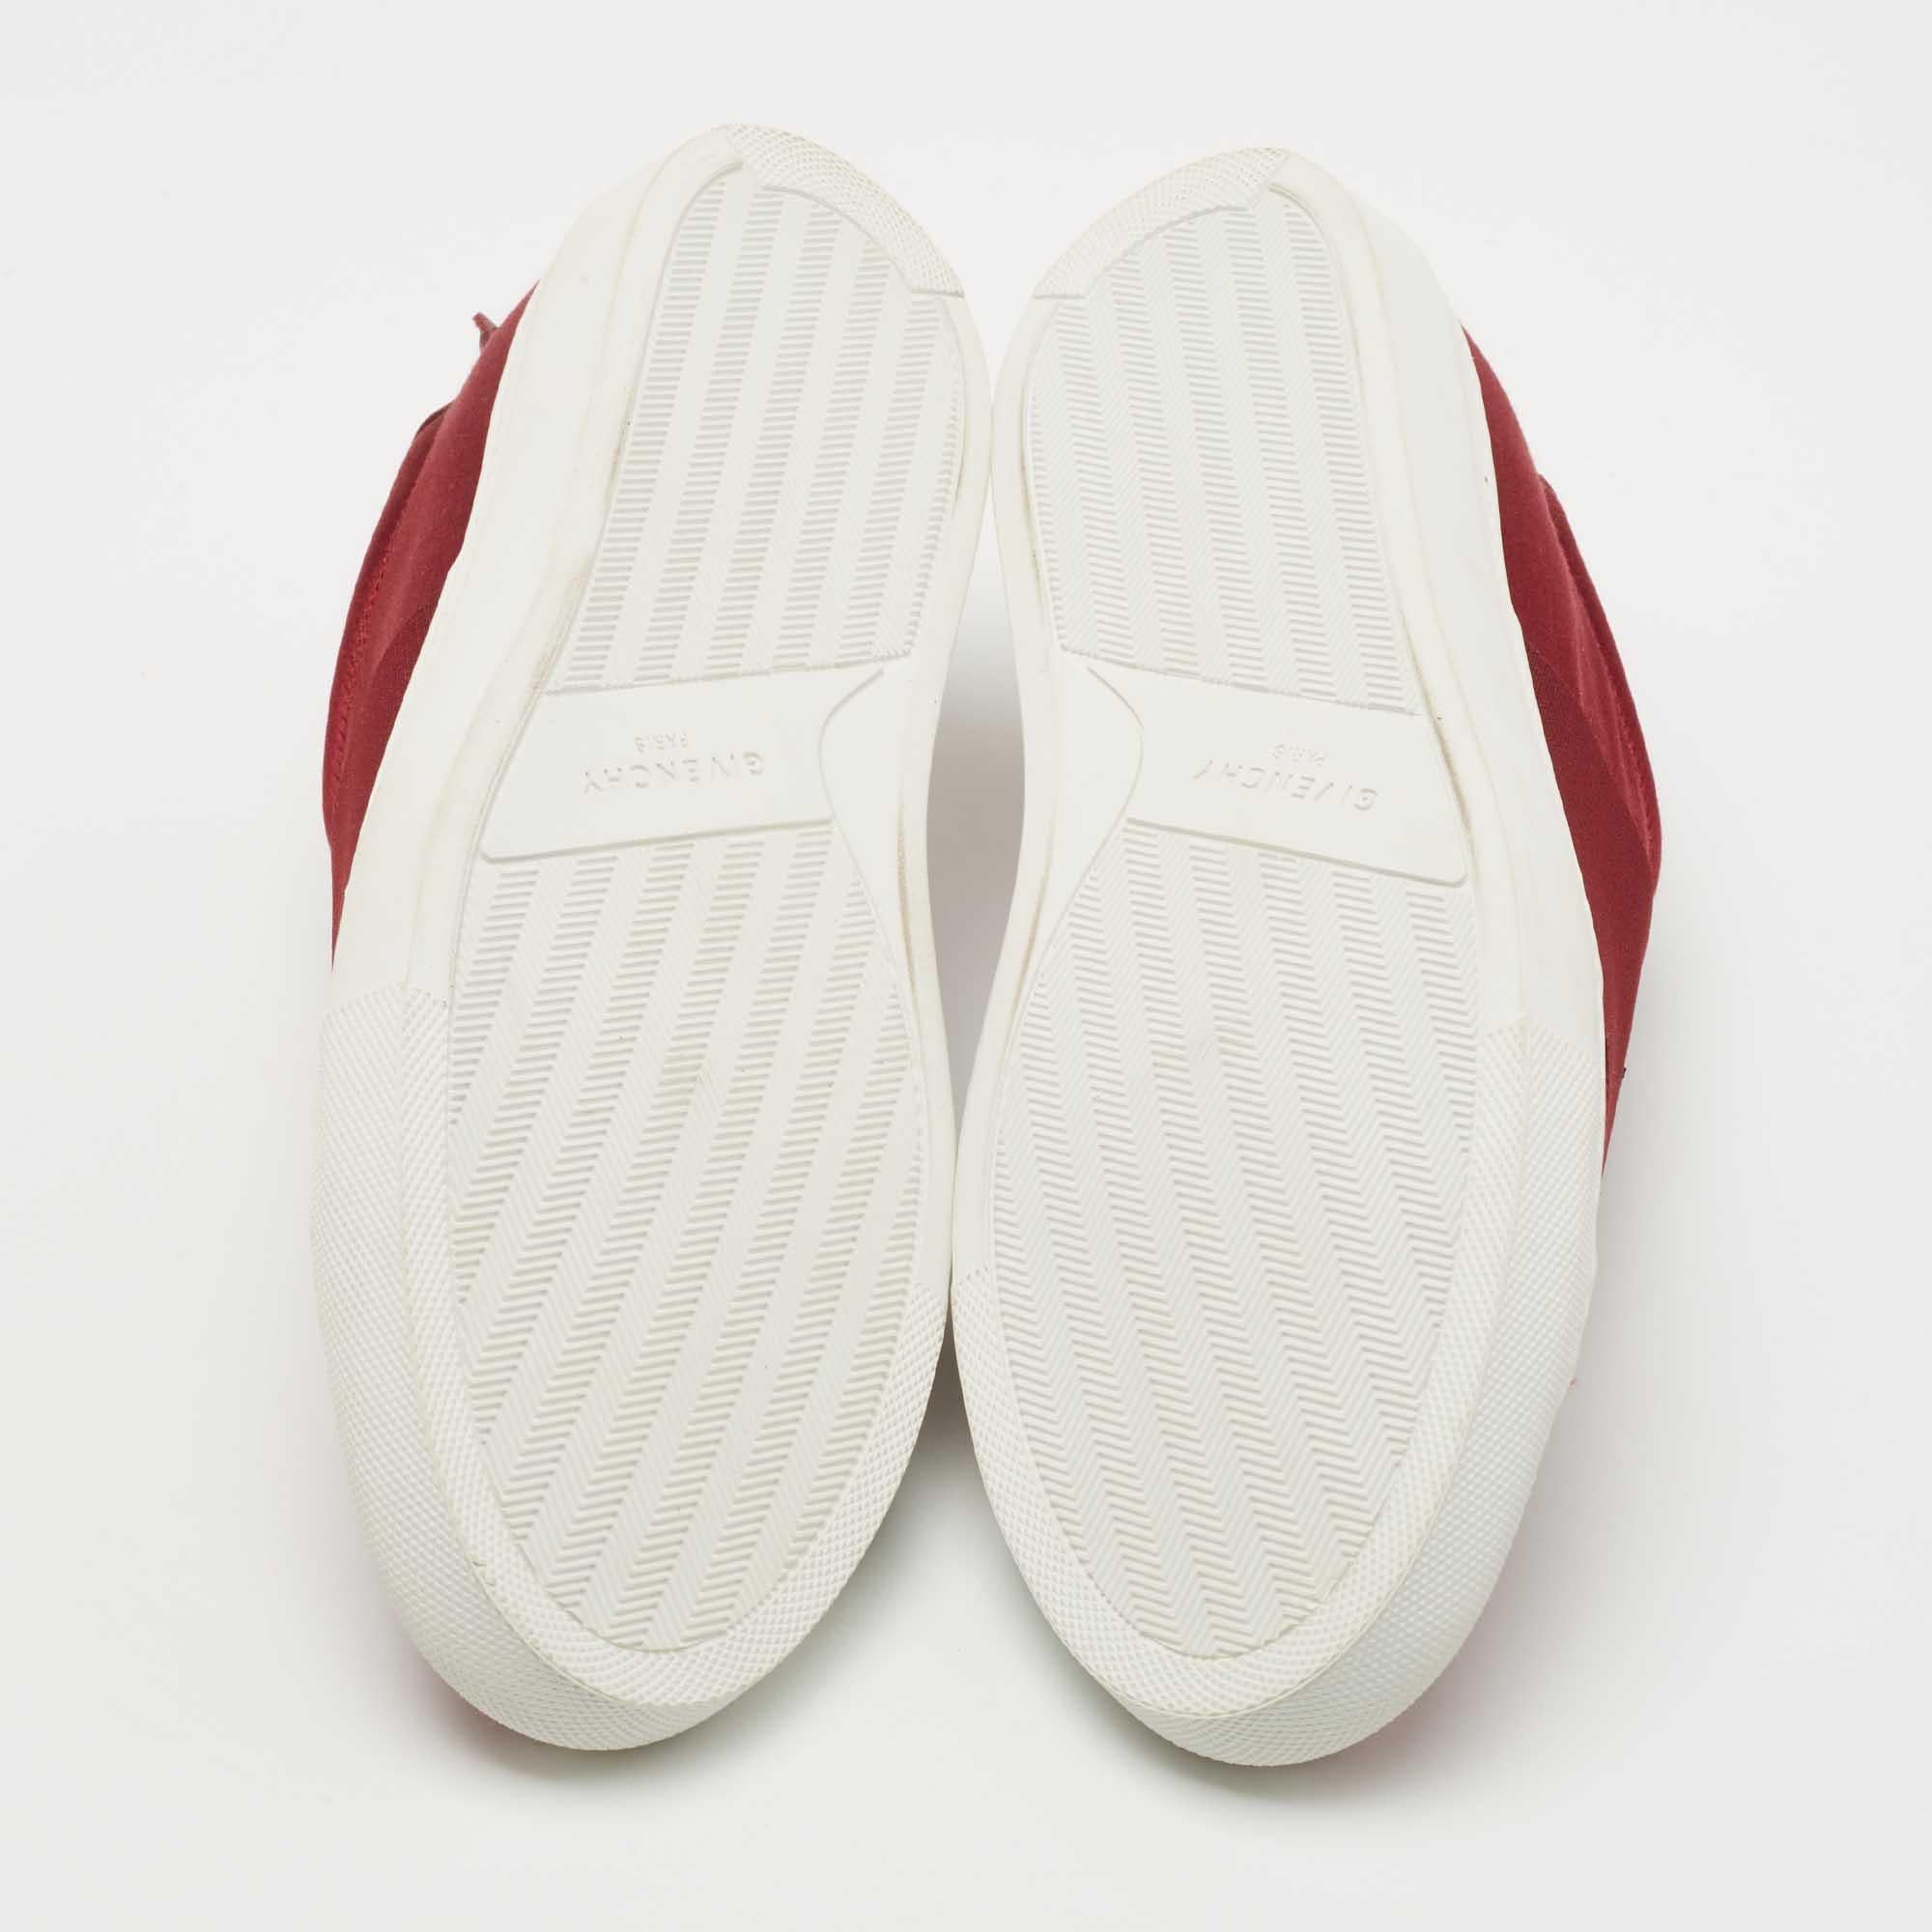 Givenchy Burgundy Satin and Elastic Band Slip On Sneakers Size 40 For Sale 1